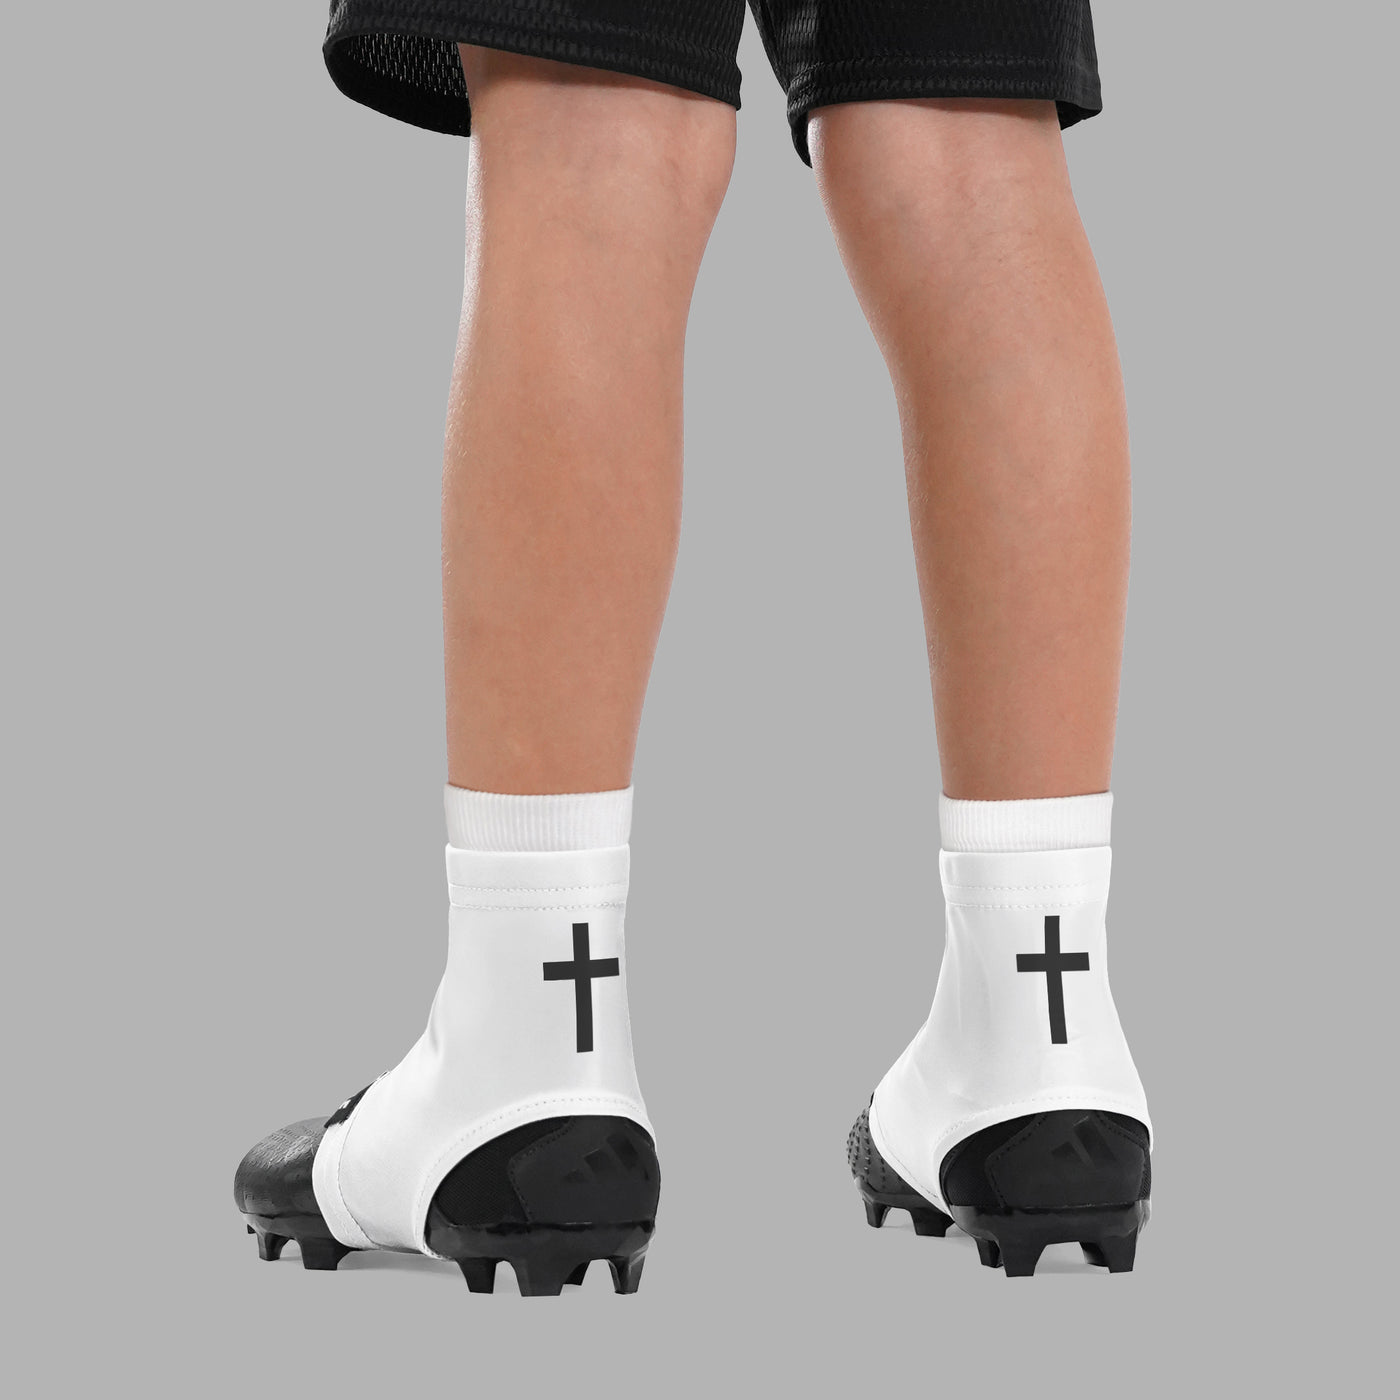 Faith Cross White Kids Spats / Cleat Covers